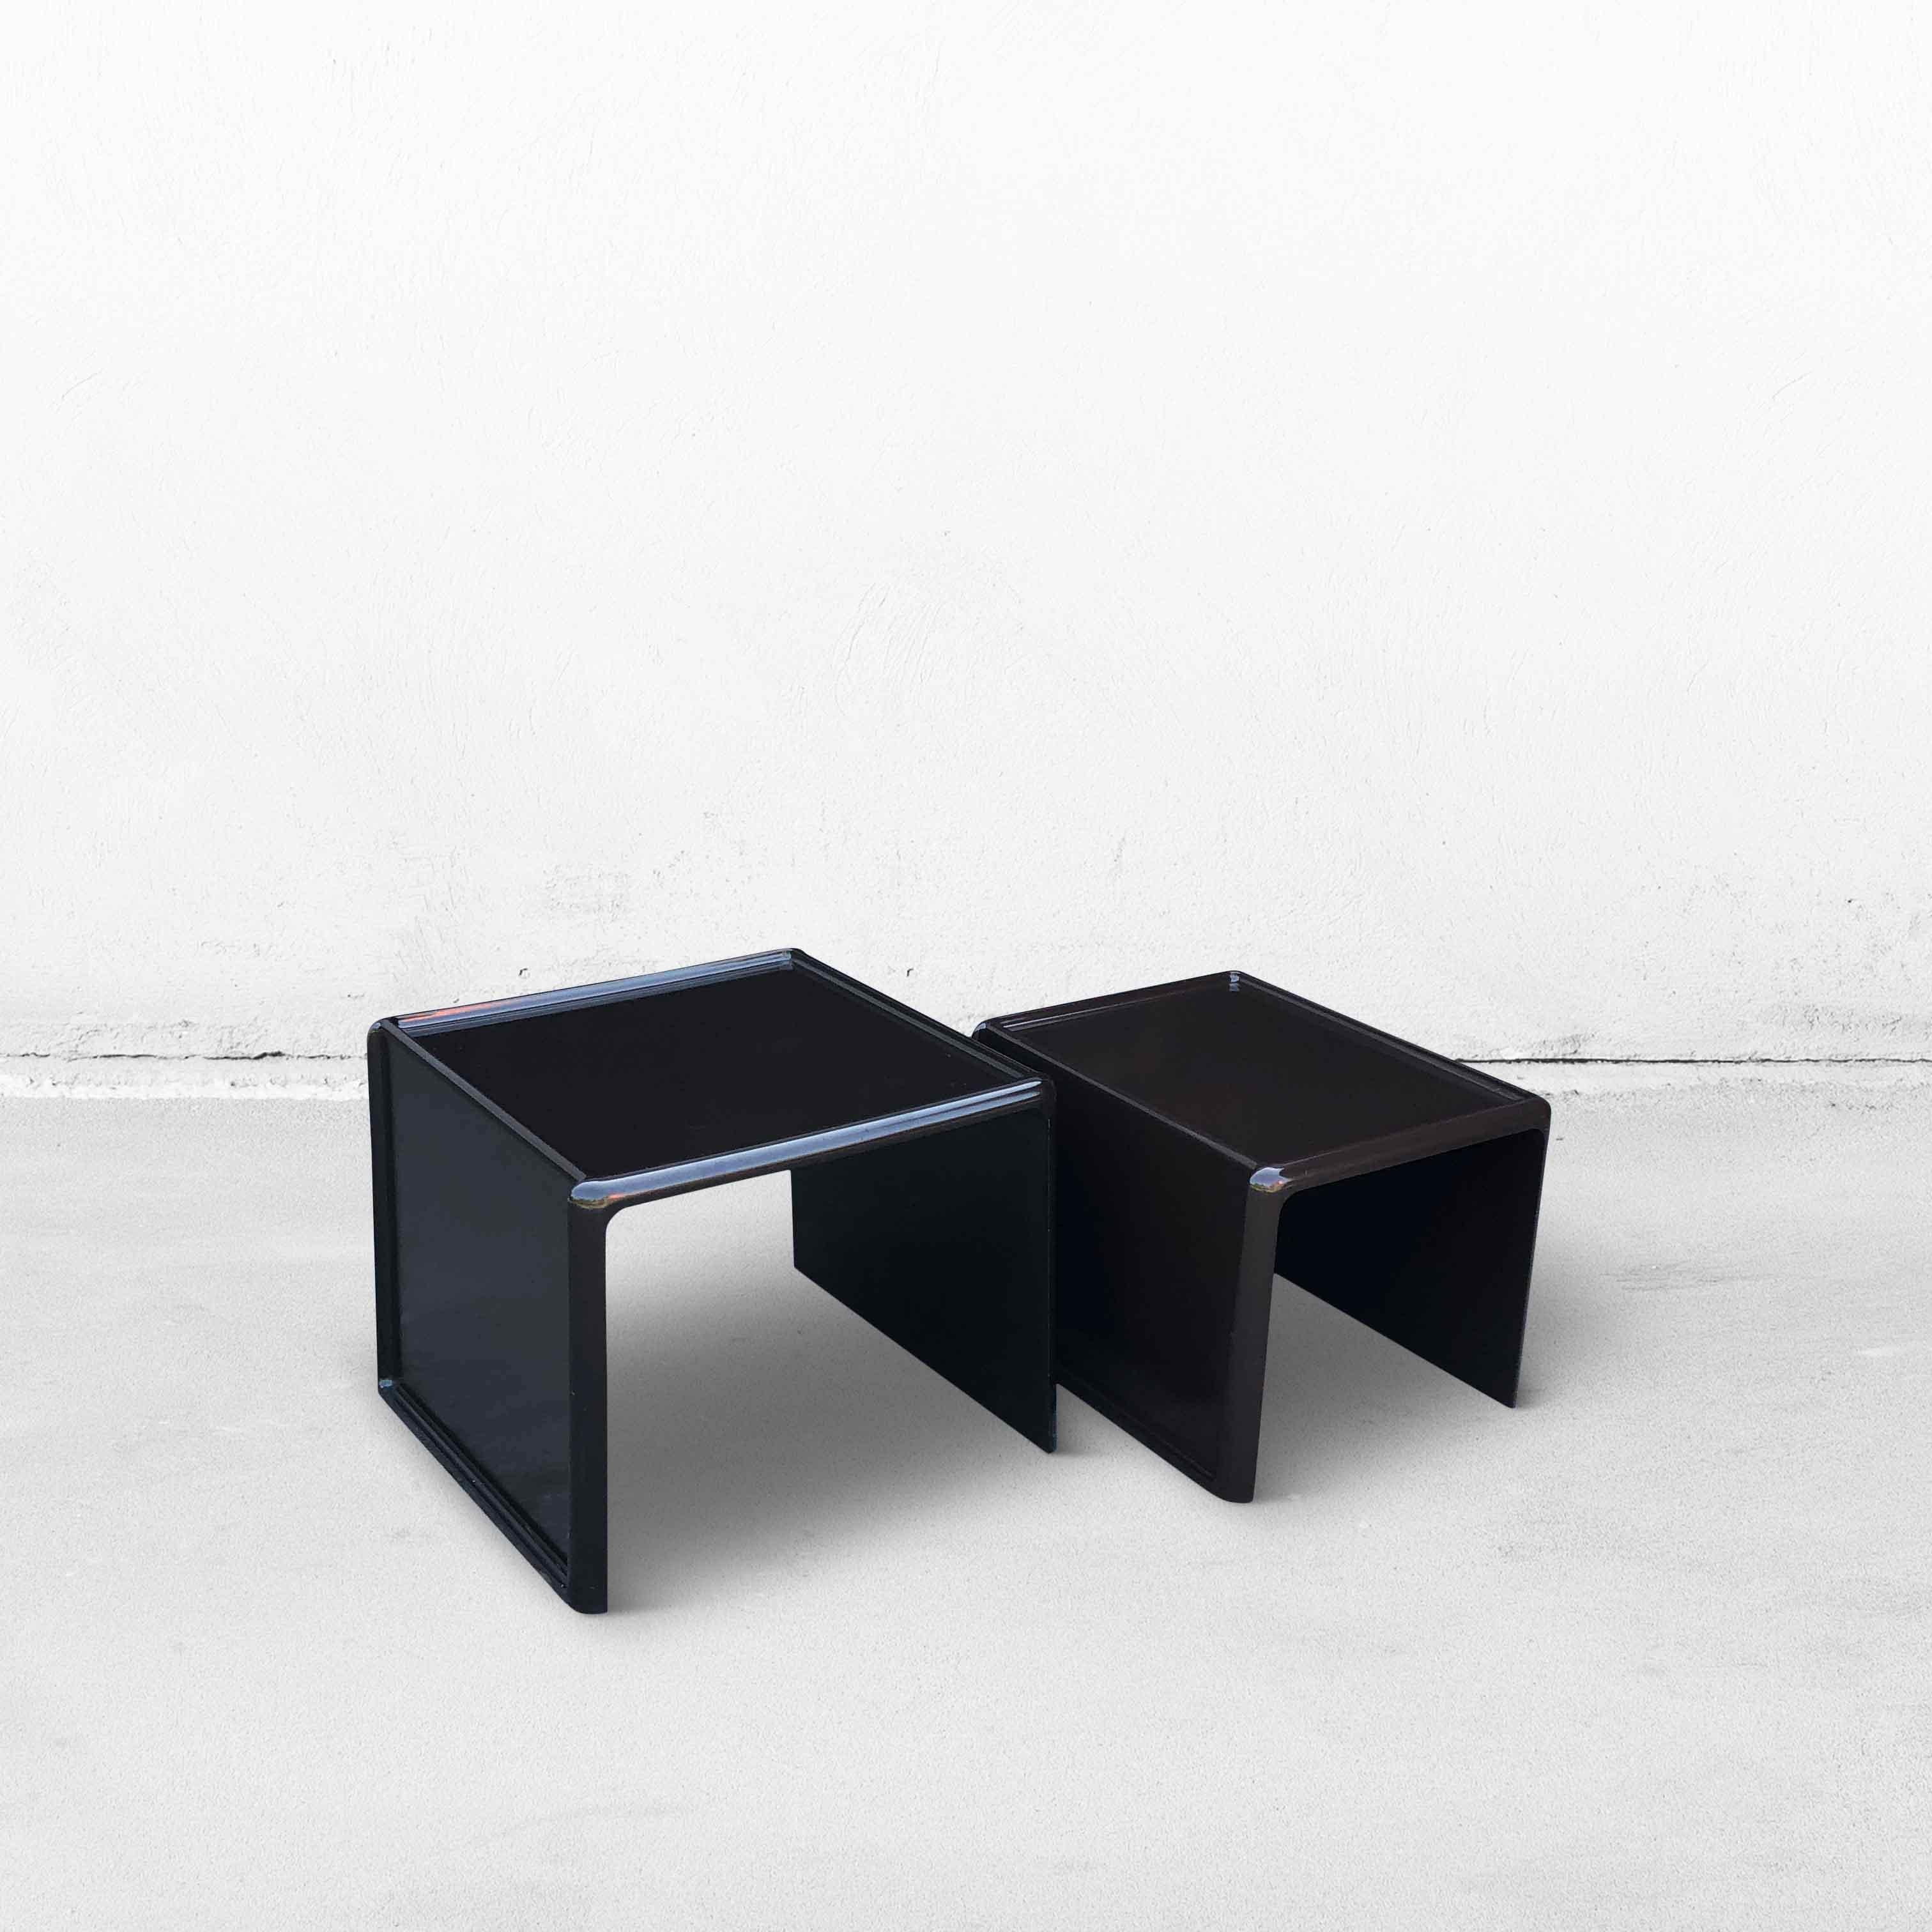 German Nesting Tables by Peter Ghyczy for Horn Collection, 1970s For Sale